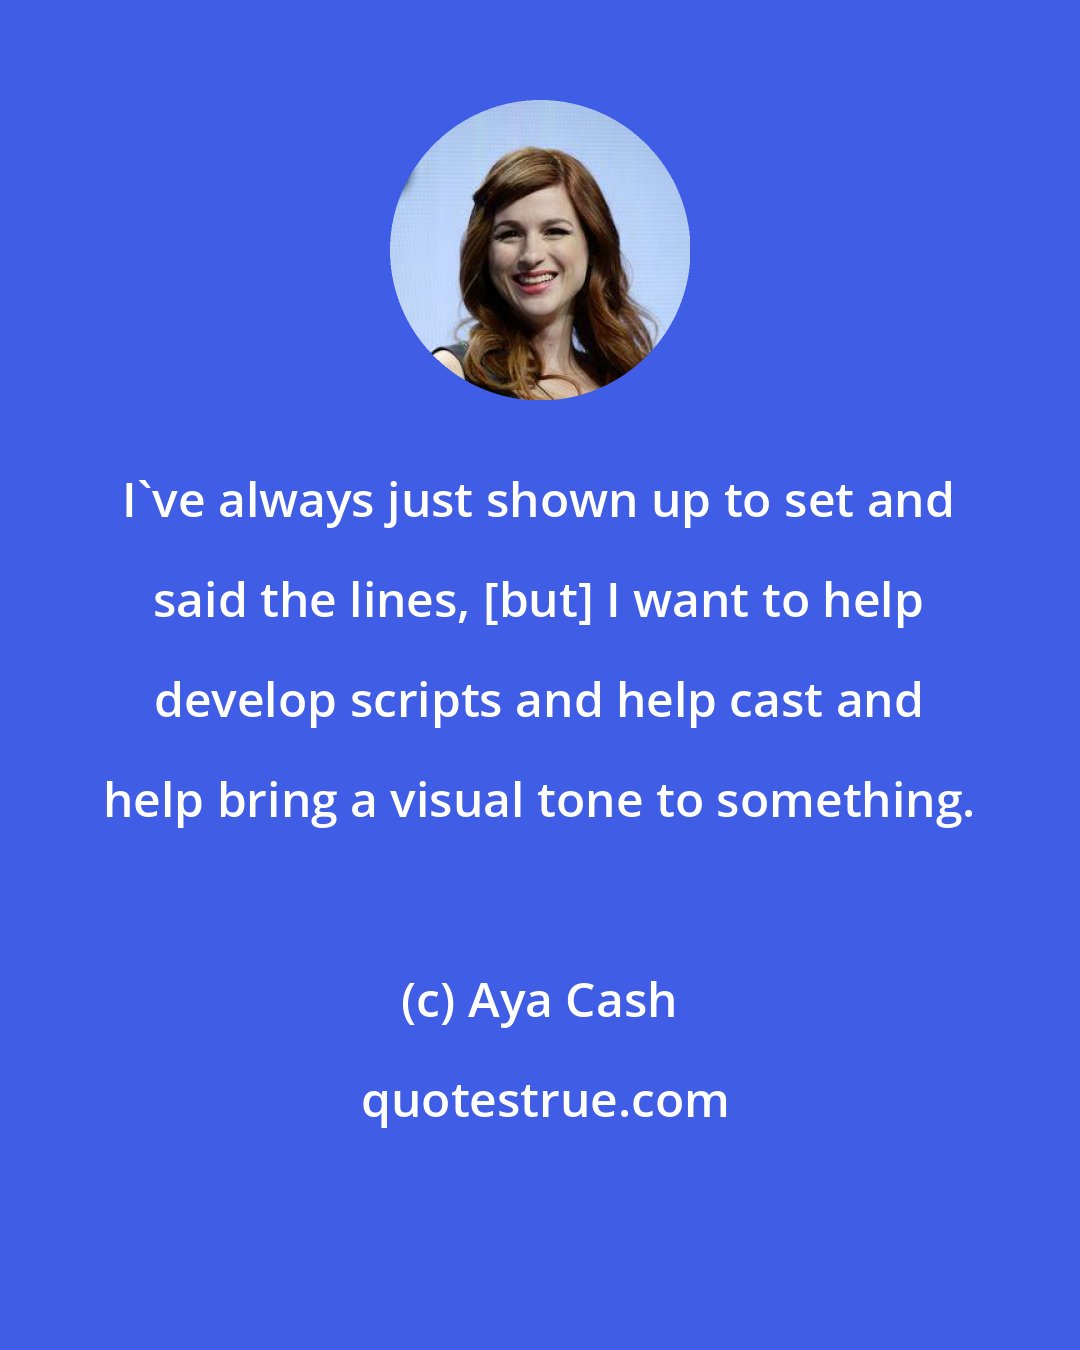 Aya Cash: I've always just shown up to set and said the lines, [but] I want to help develop scripts and help cast and help bring a visual tone to something.